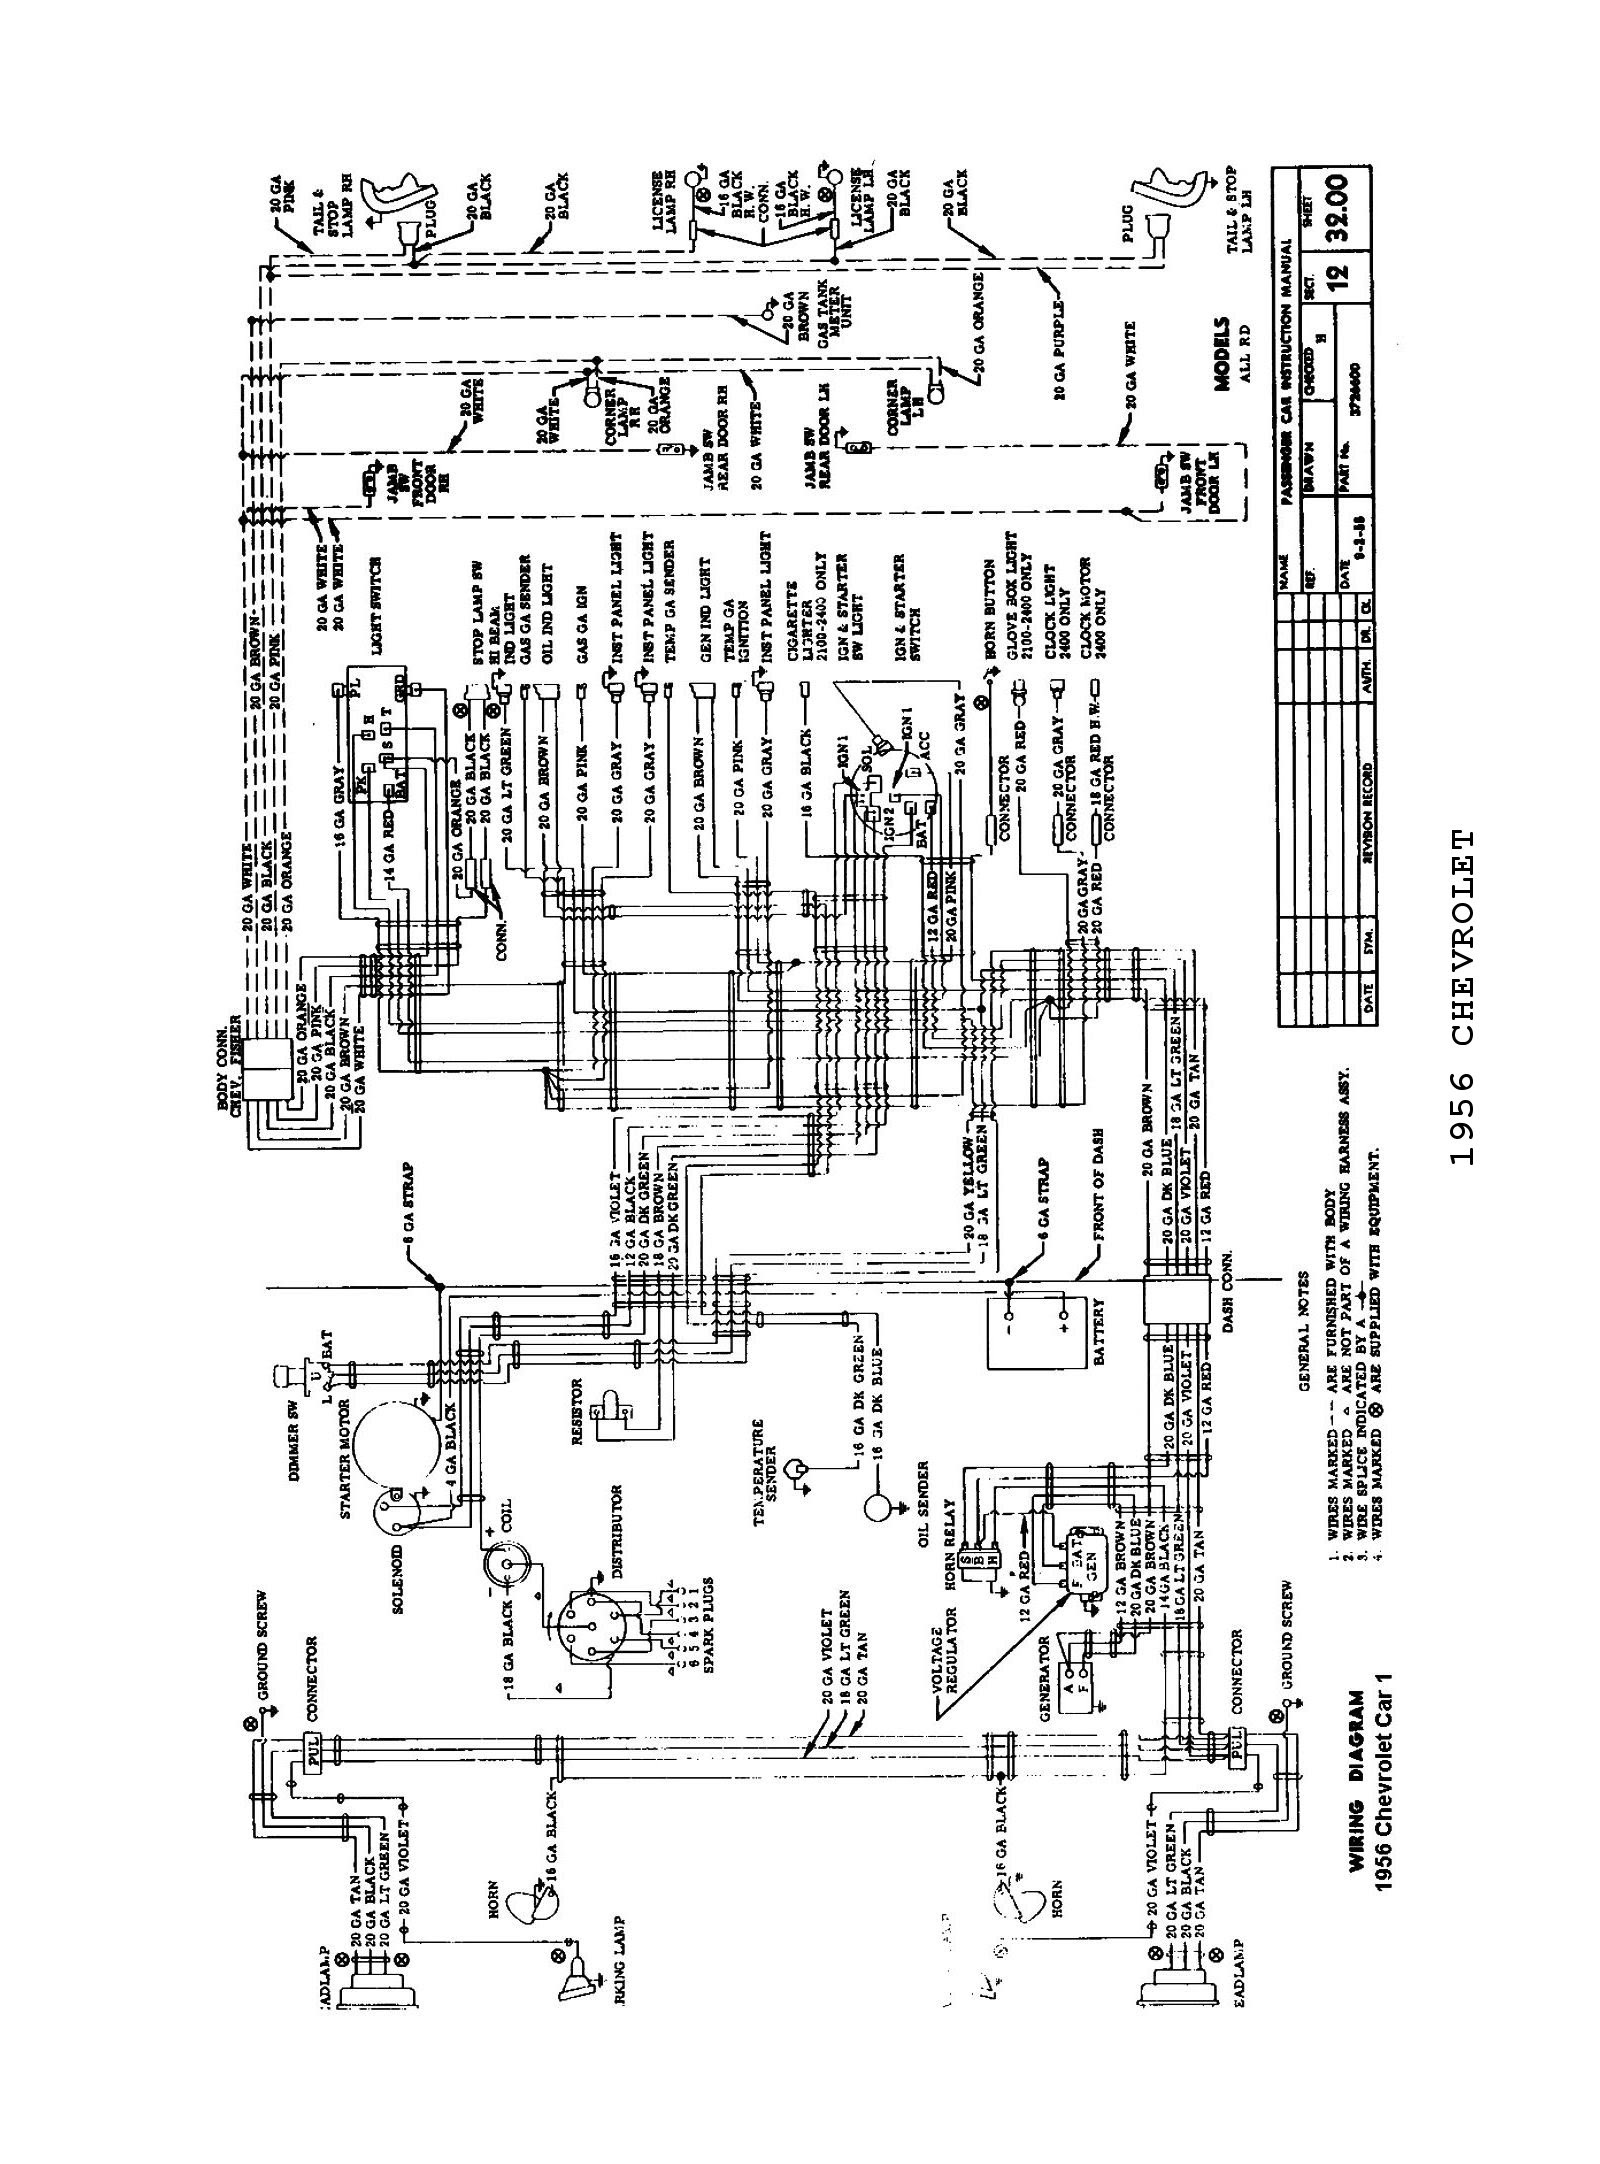 Wiring Harnes For 1946 8n Ford Tractor - Wiring Diagram Schemas